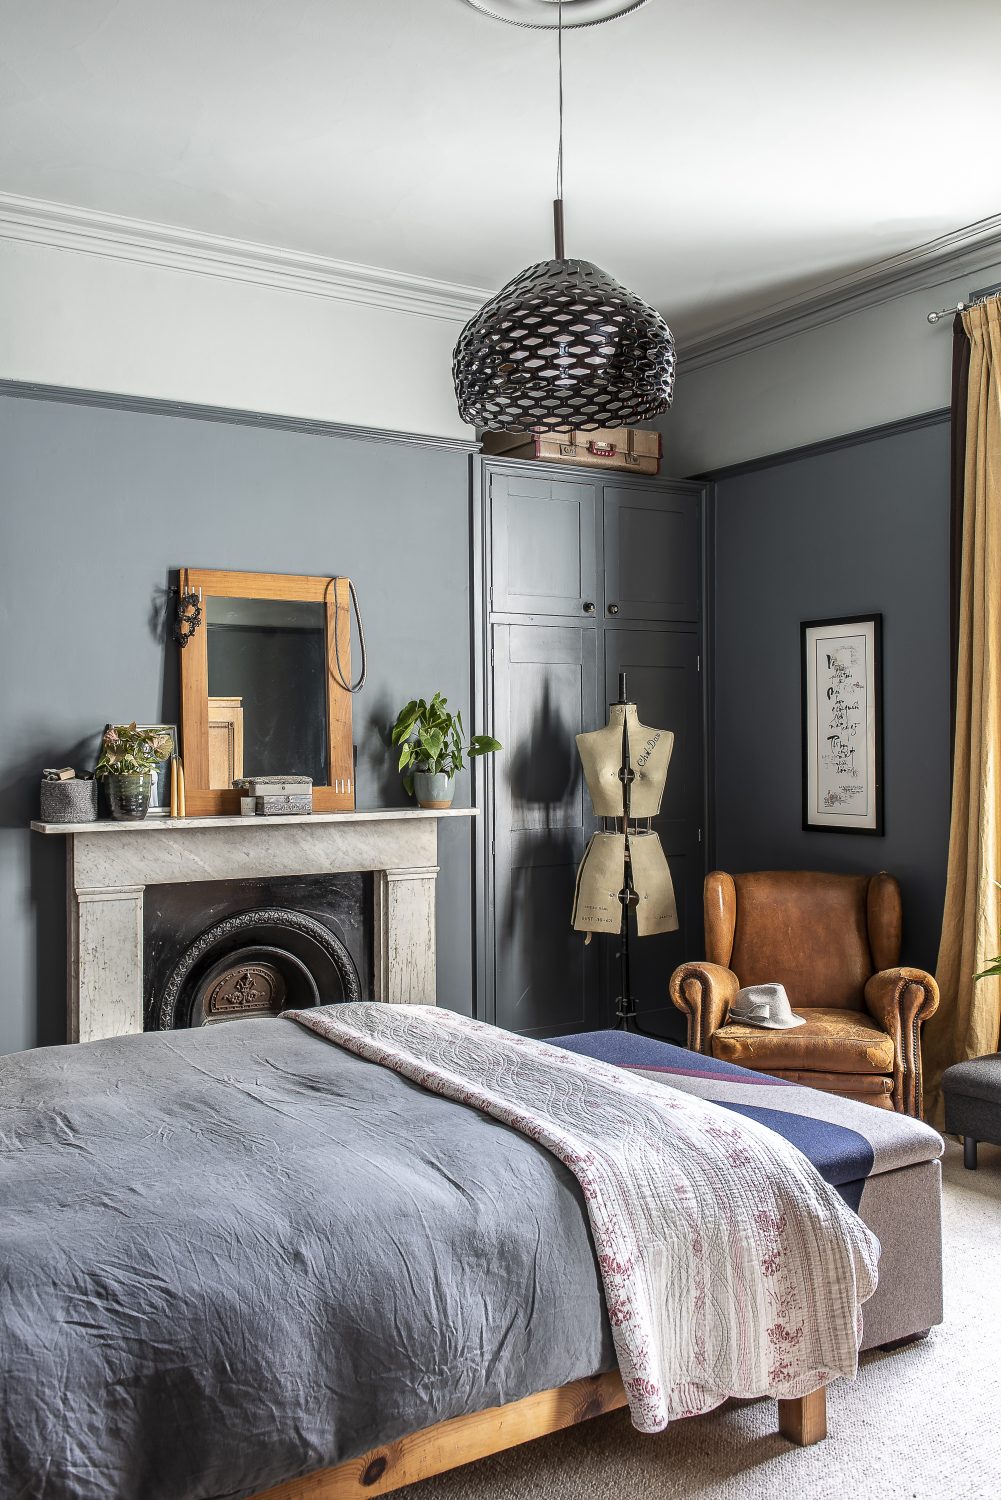 Sadie’s own bedroom is decorated in a palette of dark and light greys, golds and leather